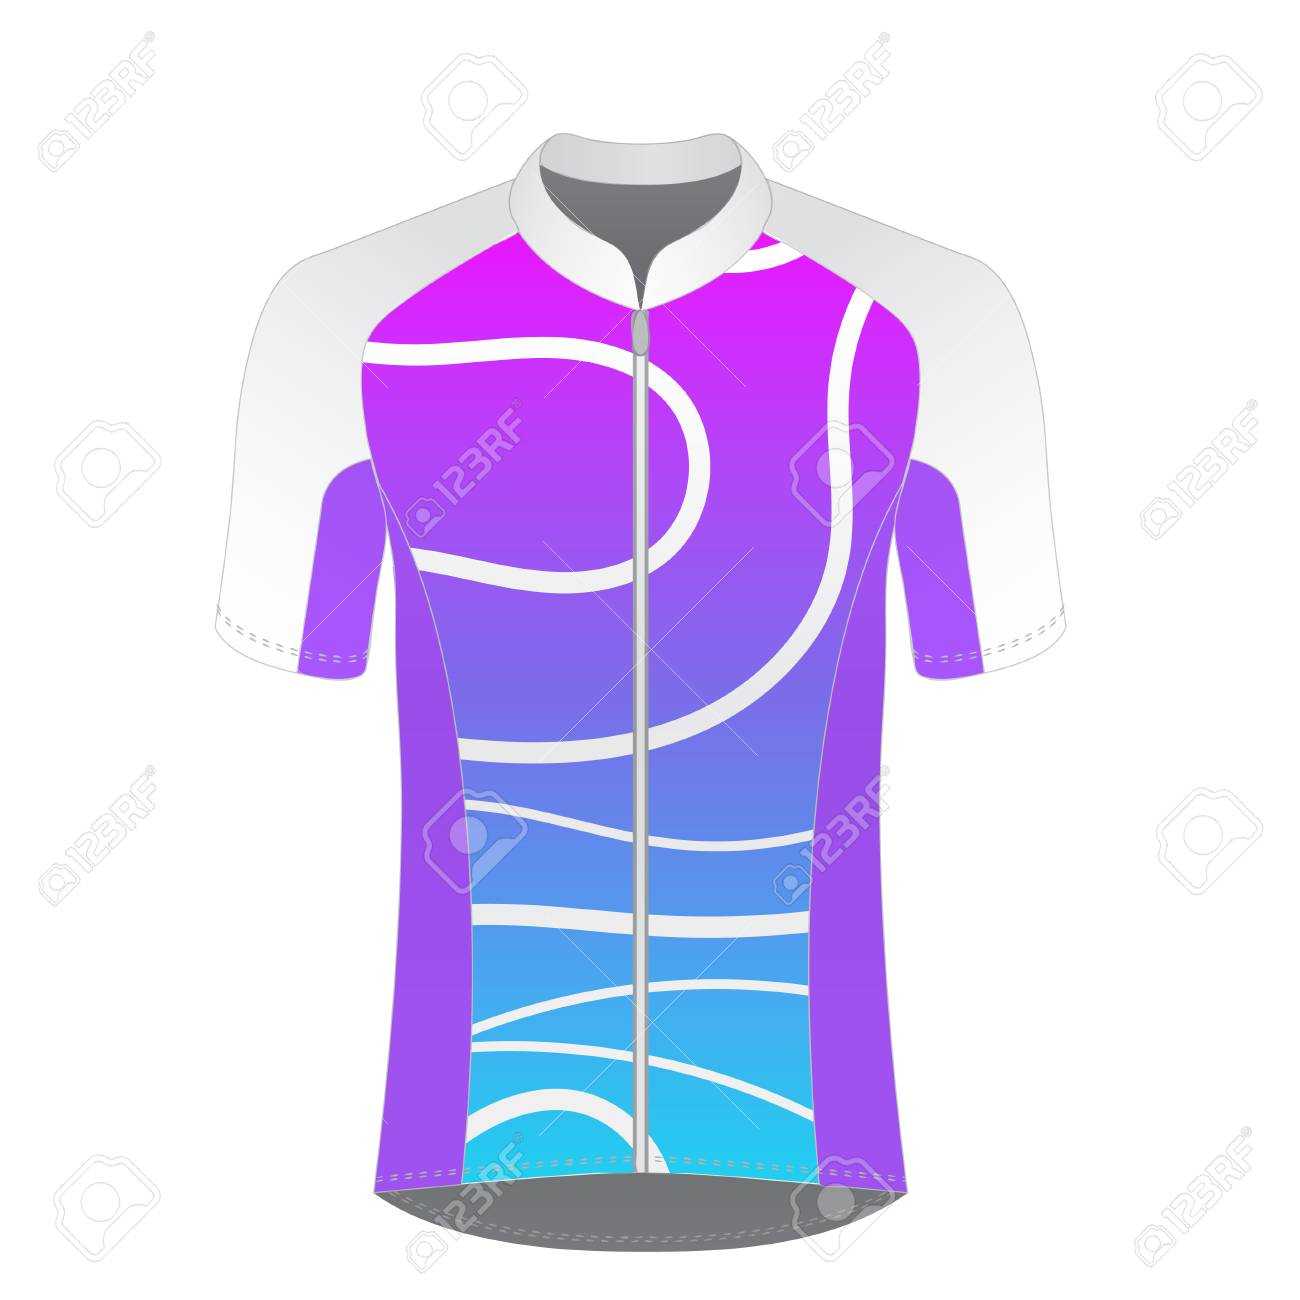 Download Cycling Jersey Mockup. T-Shirt Sport Design Template. Road ...